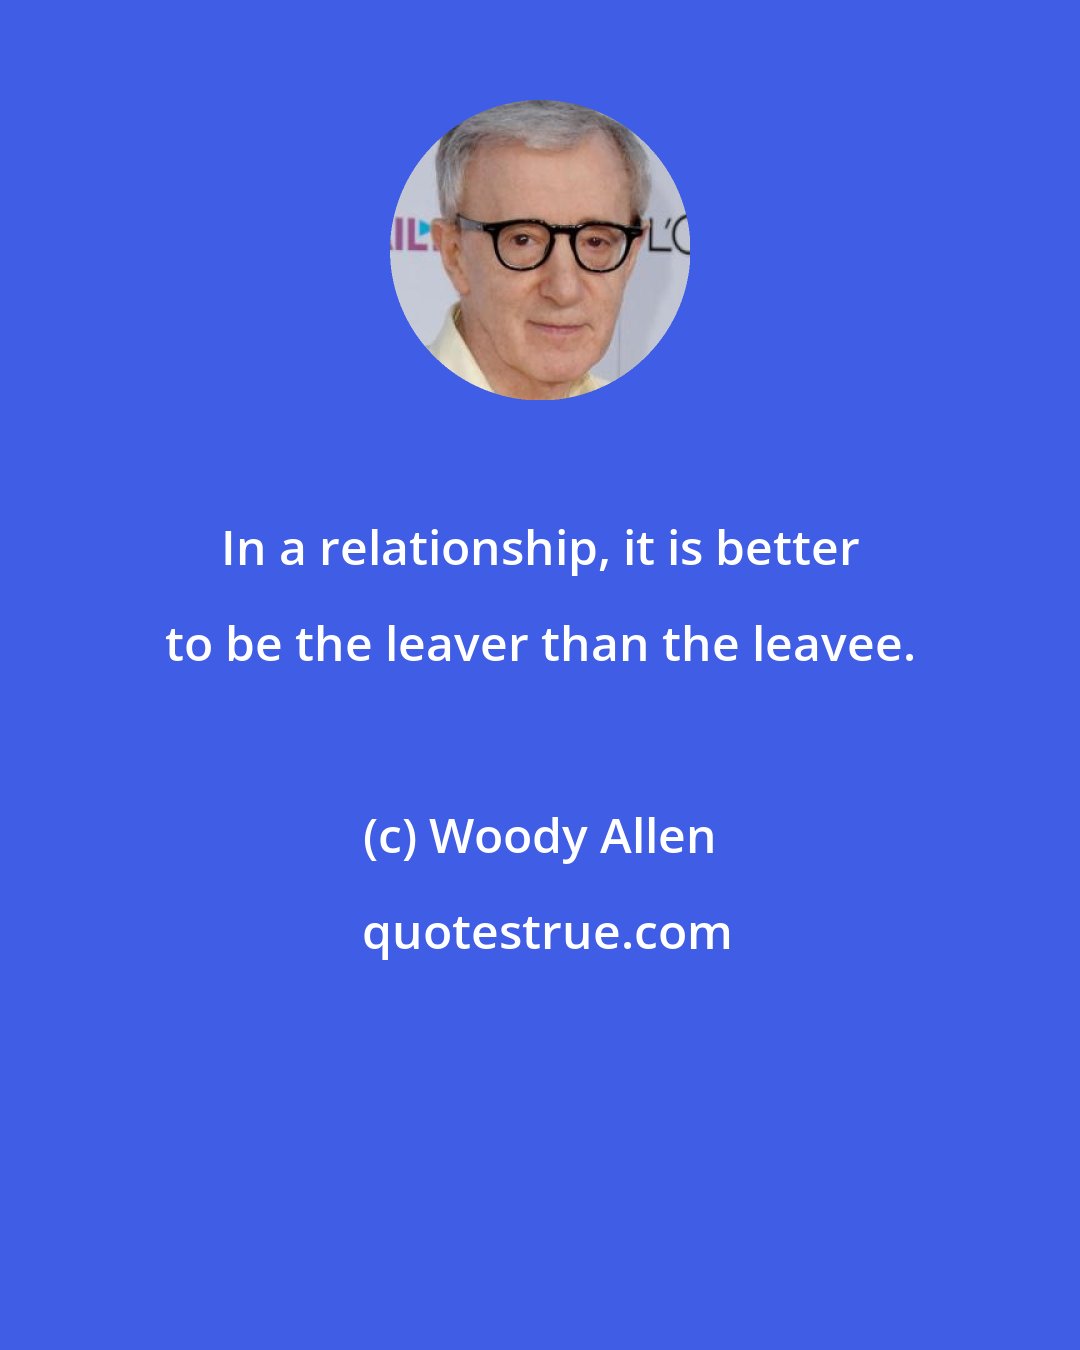 Woody Allen: In a relationship, it is better to be the leaver than the leavee.